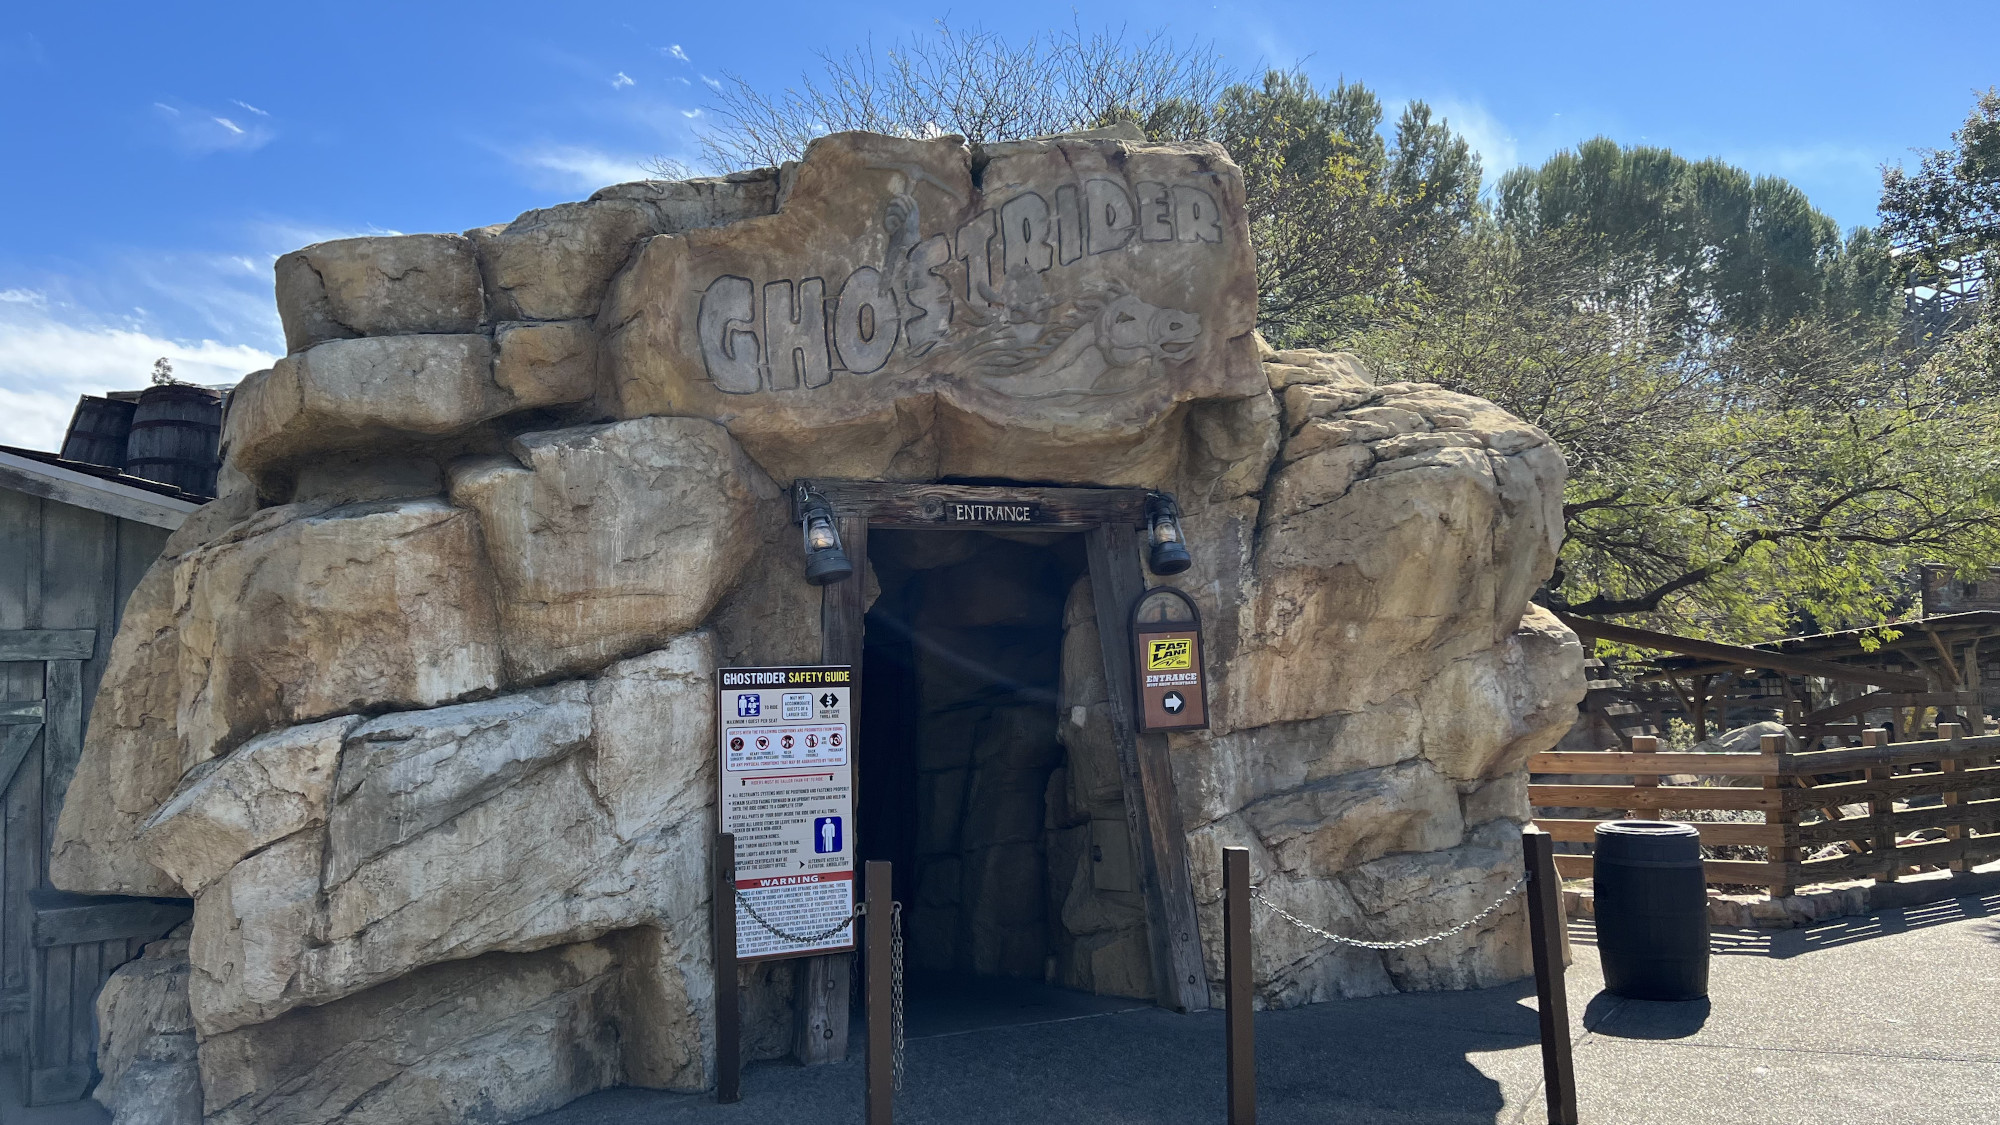 Ghost Town Ghostrider Entrance